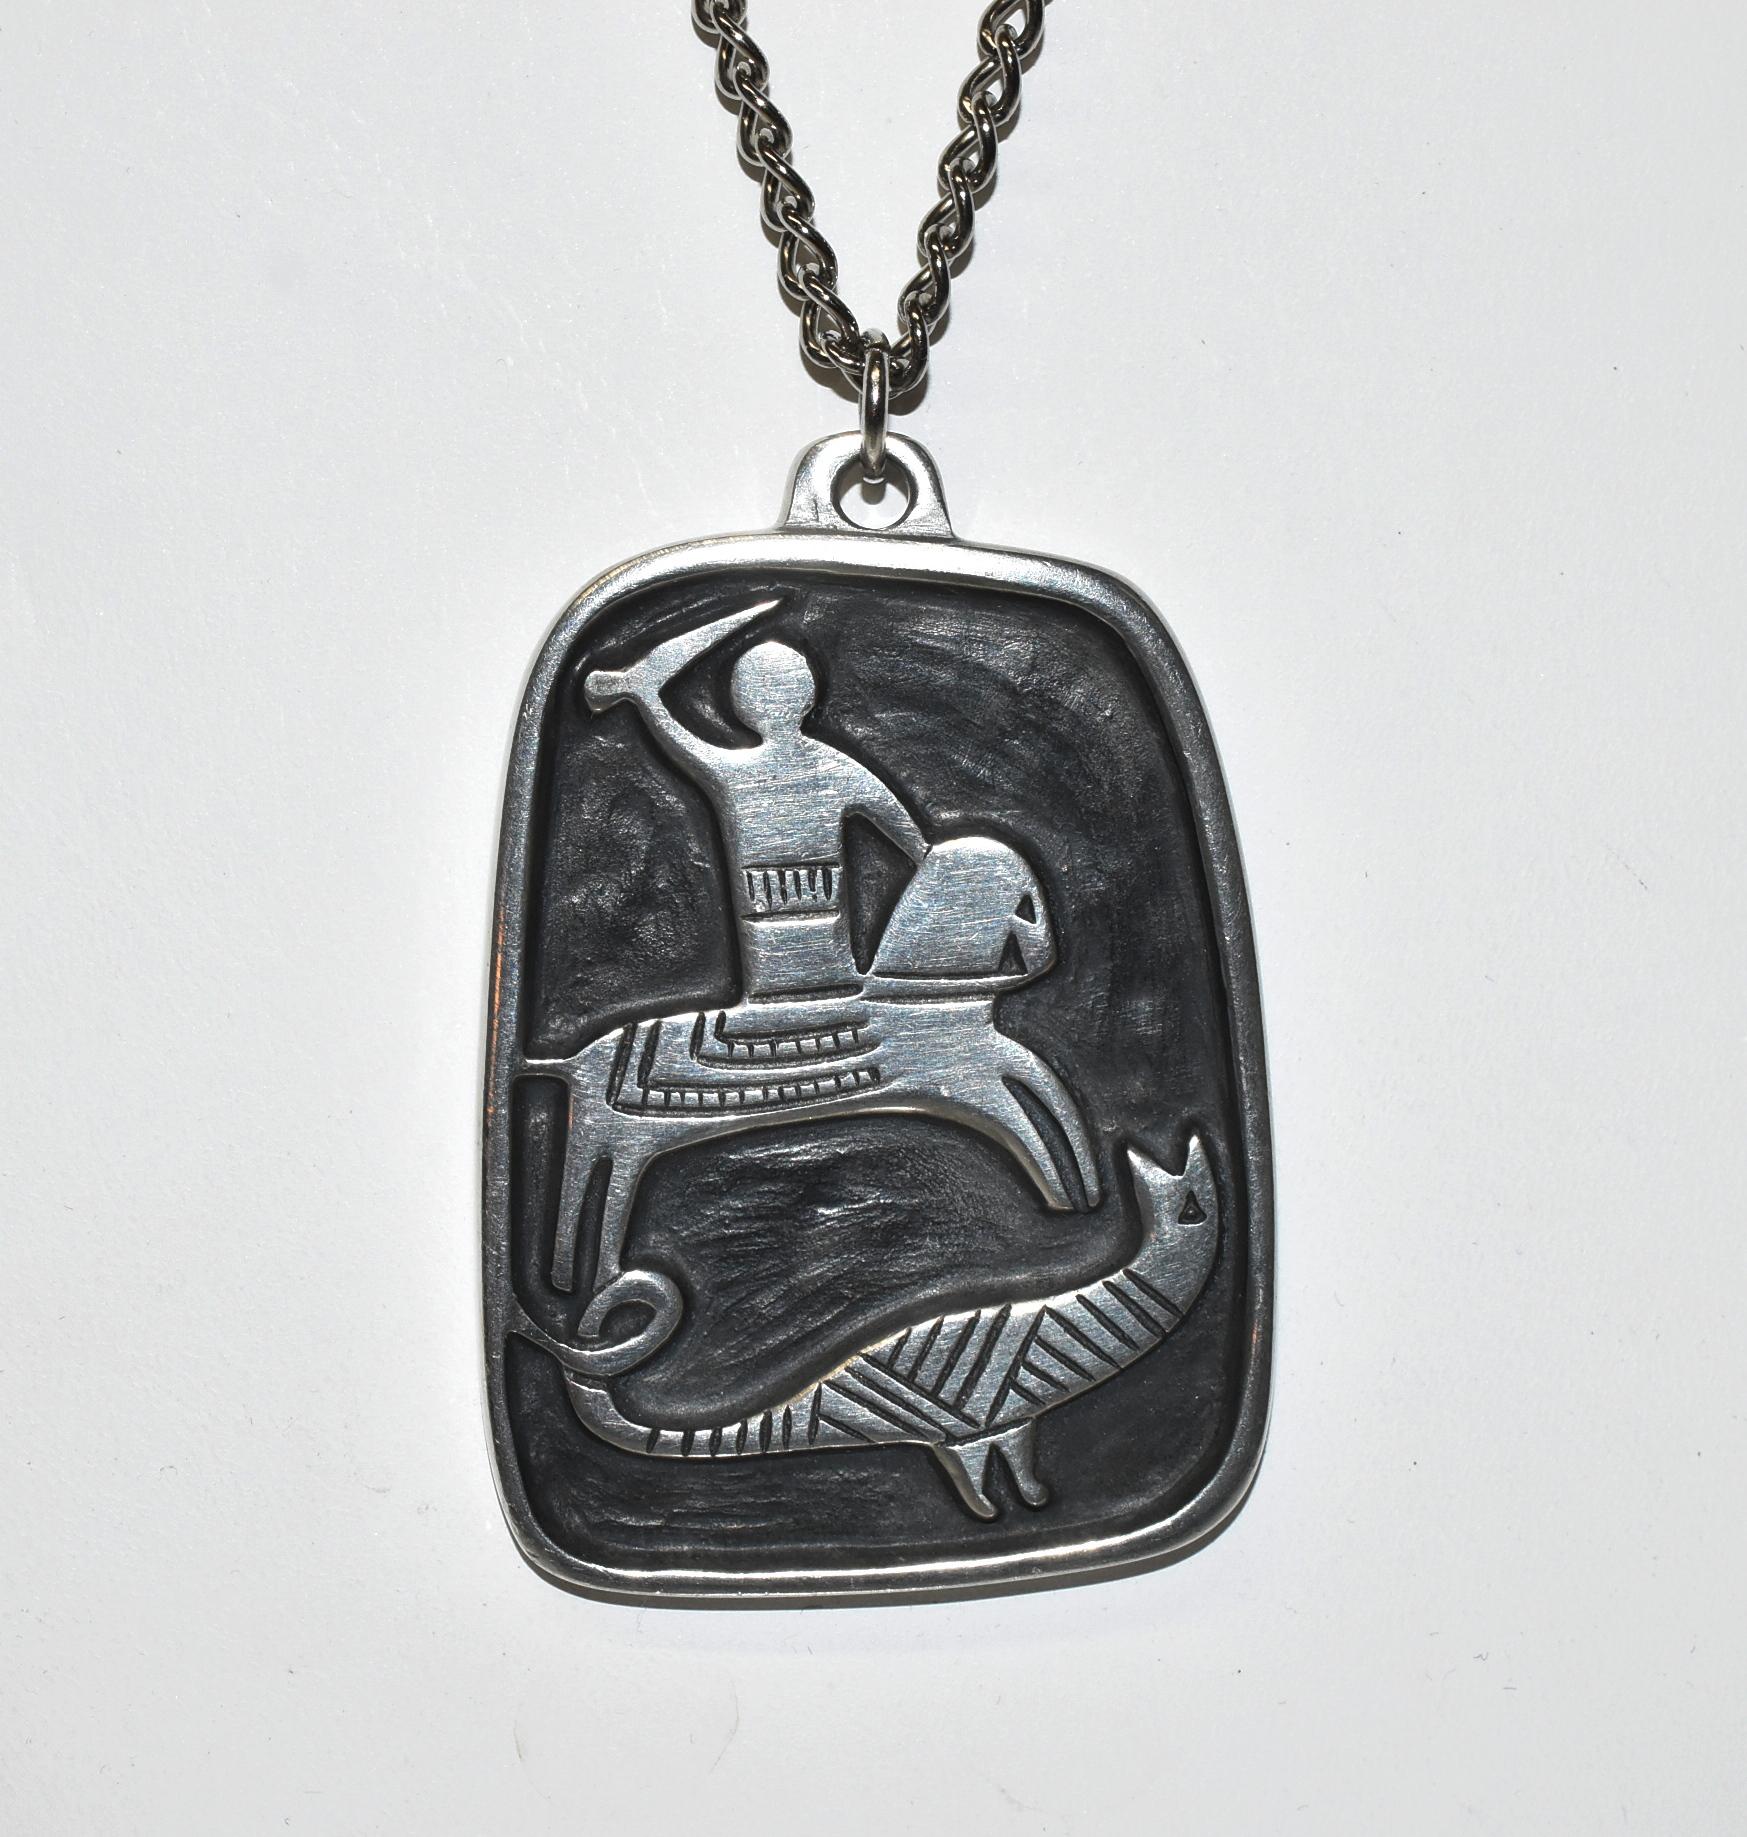 Modern pewter necklace by R. Landerholm. Depicts St. George slaying a dragon. Signed on the back with a crown hallmark. Very nice condition. Dimensions: 1.5